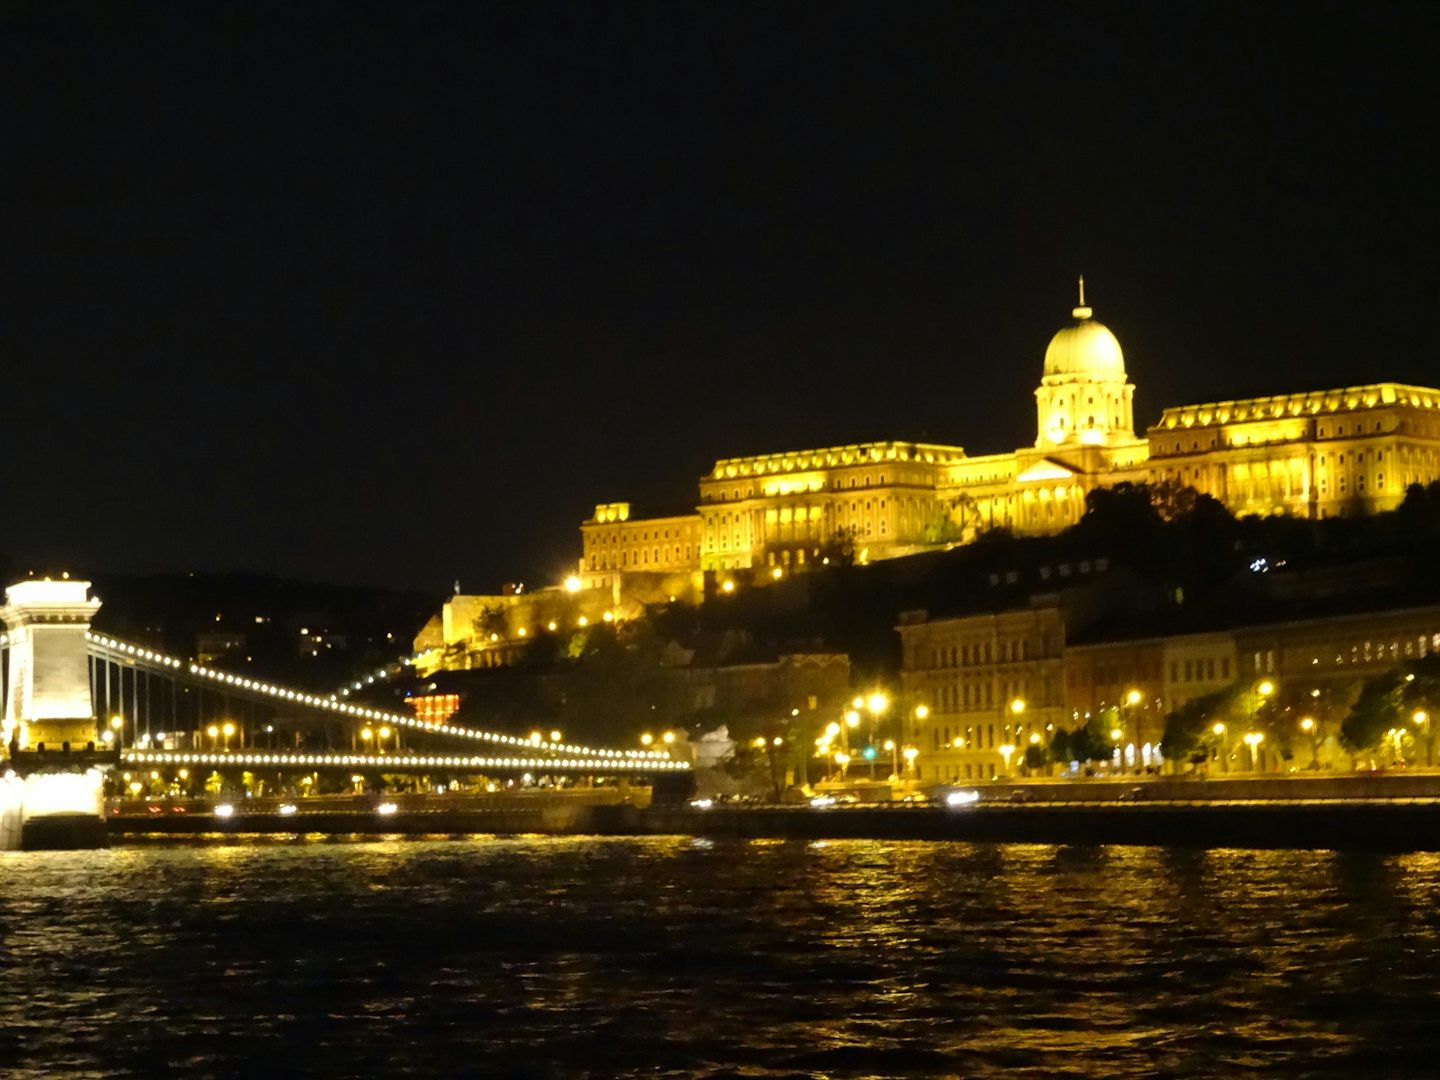 Budapest night view from ship